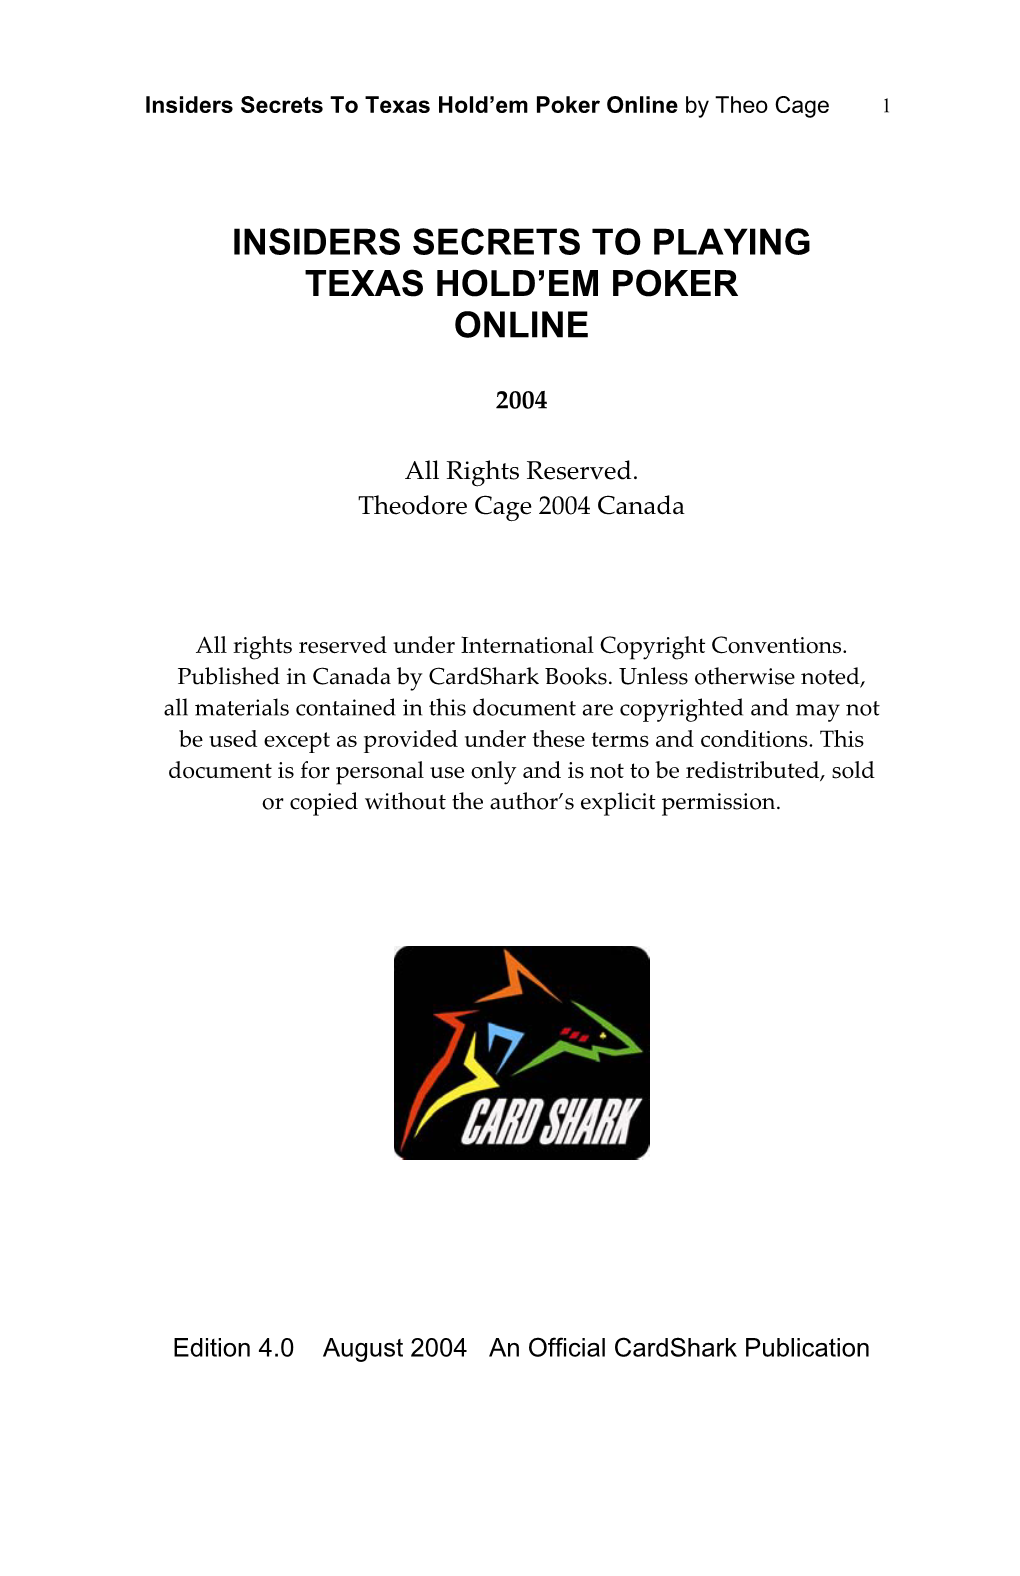 Insiders Secrets to Playing Texas Hold'em Poker Online